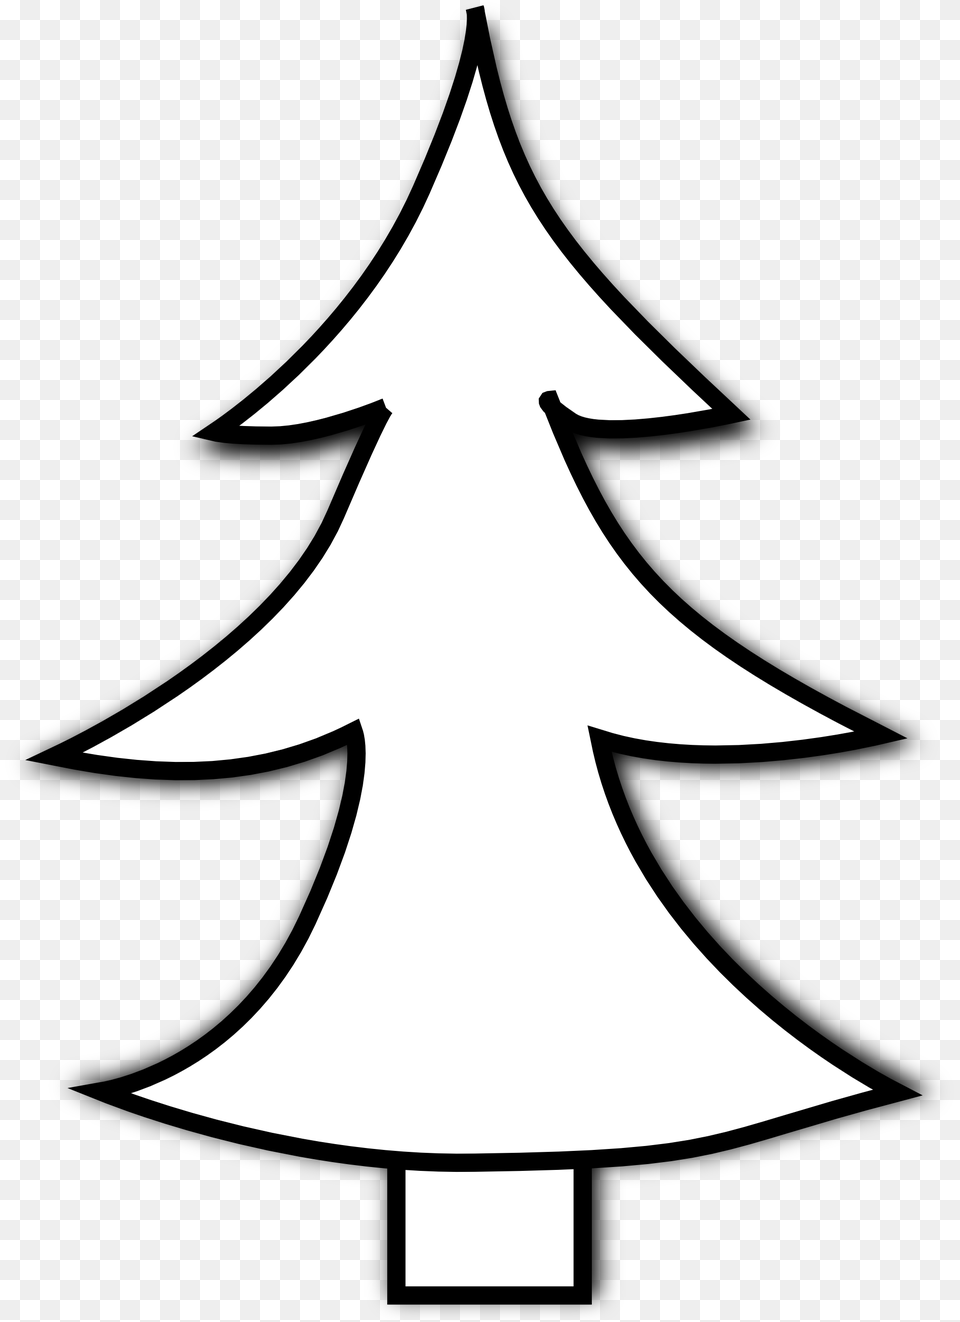 Pine Tree Clipart Black, Bow, Stencil, Weapon, Christmas Free Transparent Png